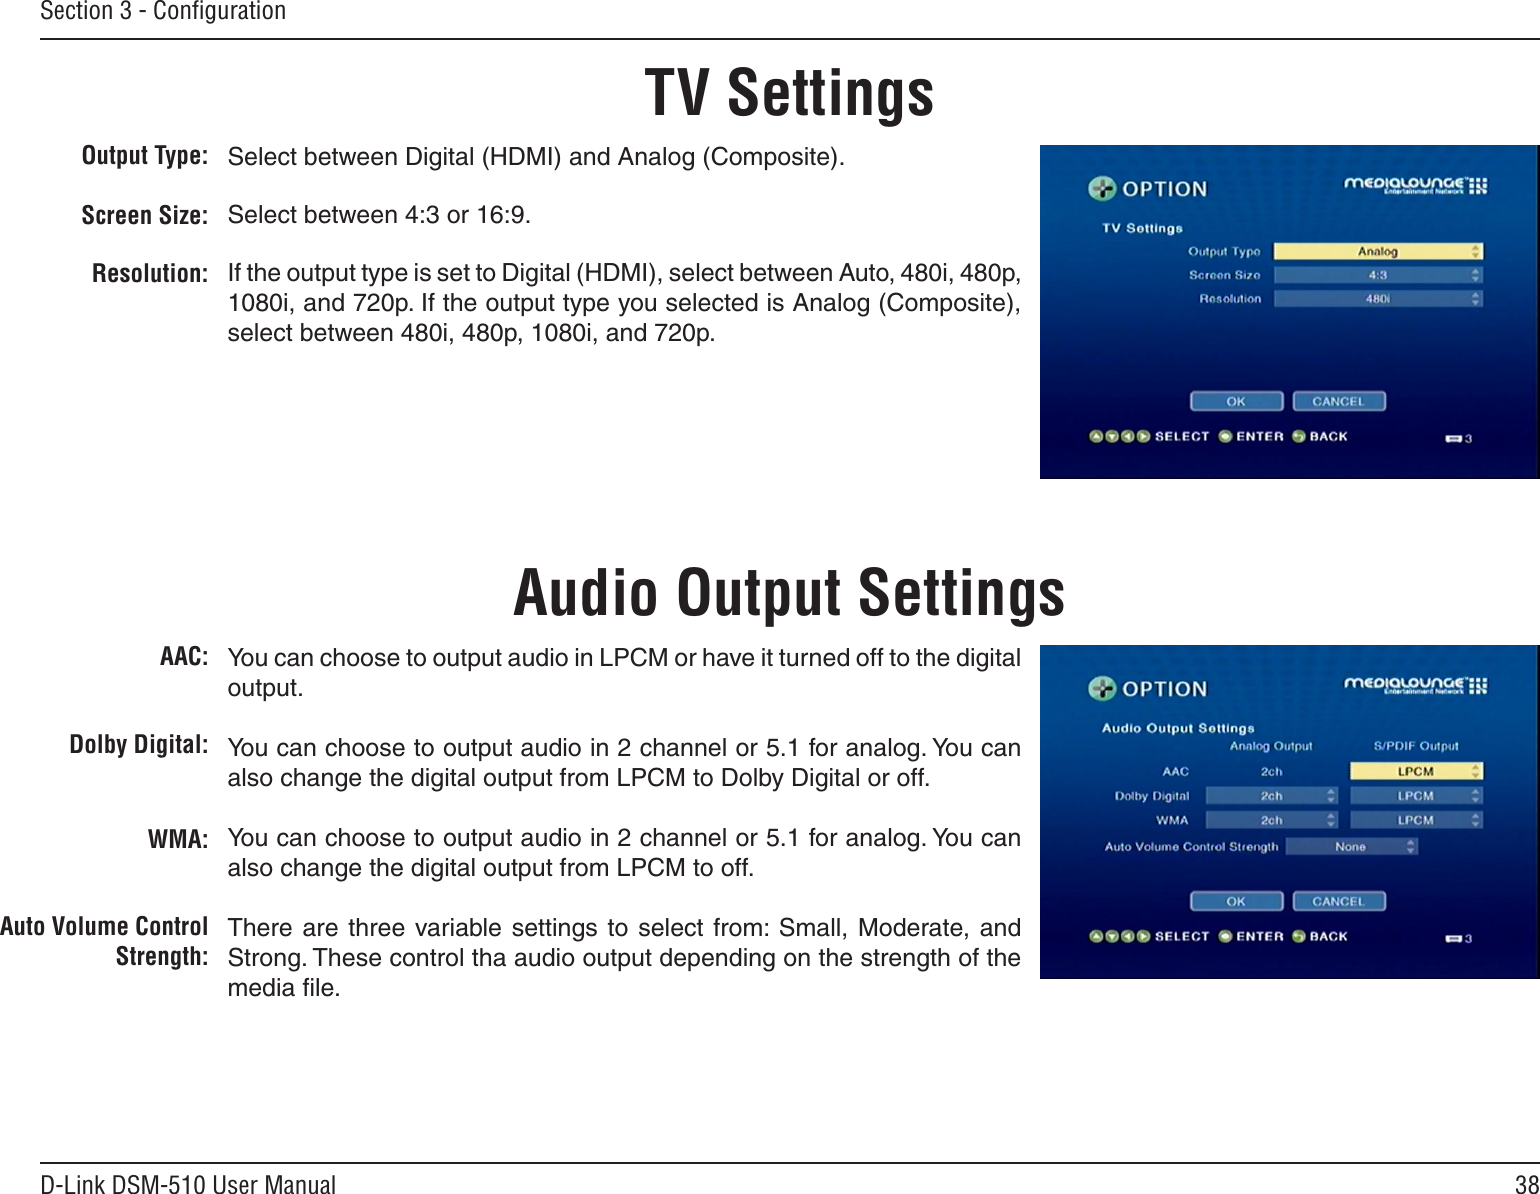 38D-Link DSM-510 User ManualSection 3 - ConﬁgurationTV SettingsOutput Type:Screen Size:Resolution:Select between Digital (HDMI) and Analog (Composite).Select between 4:3 or 16:9.If the output type is set to Digital (HDMI), select between Auto, 480i, 480p, 1080i, and 720p. If the output type you selected is Analog (Composite), select between 480i, 480p, 1080i, and 720p.AAC:Dolby Digital:WMA:Auto Volume Control Strength:You can choose to output audio in LPCM or have it turned off to the digital output. You can choose to output audio in 2 channel or 5.1 for analog. You can also change the digital output from LPCM to Dolby Digital or off.You can choose to output audio in 2 channel or 5.1 for analog. You can also change the digital output from LPCM to off.There are  three  variable  settings to select  from: Small,  Moderate, and Strong. These control tha audio output depending on the strength of the media ﬁle.Audio Output Settings